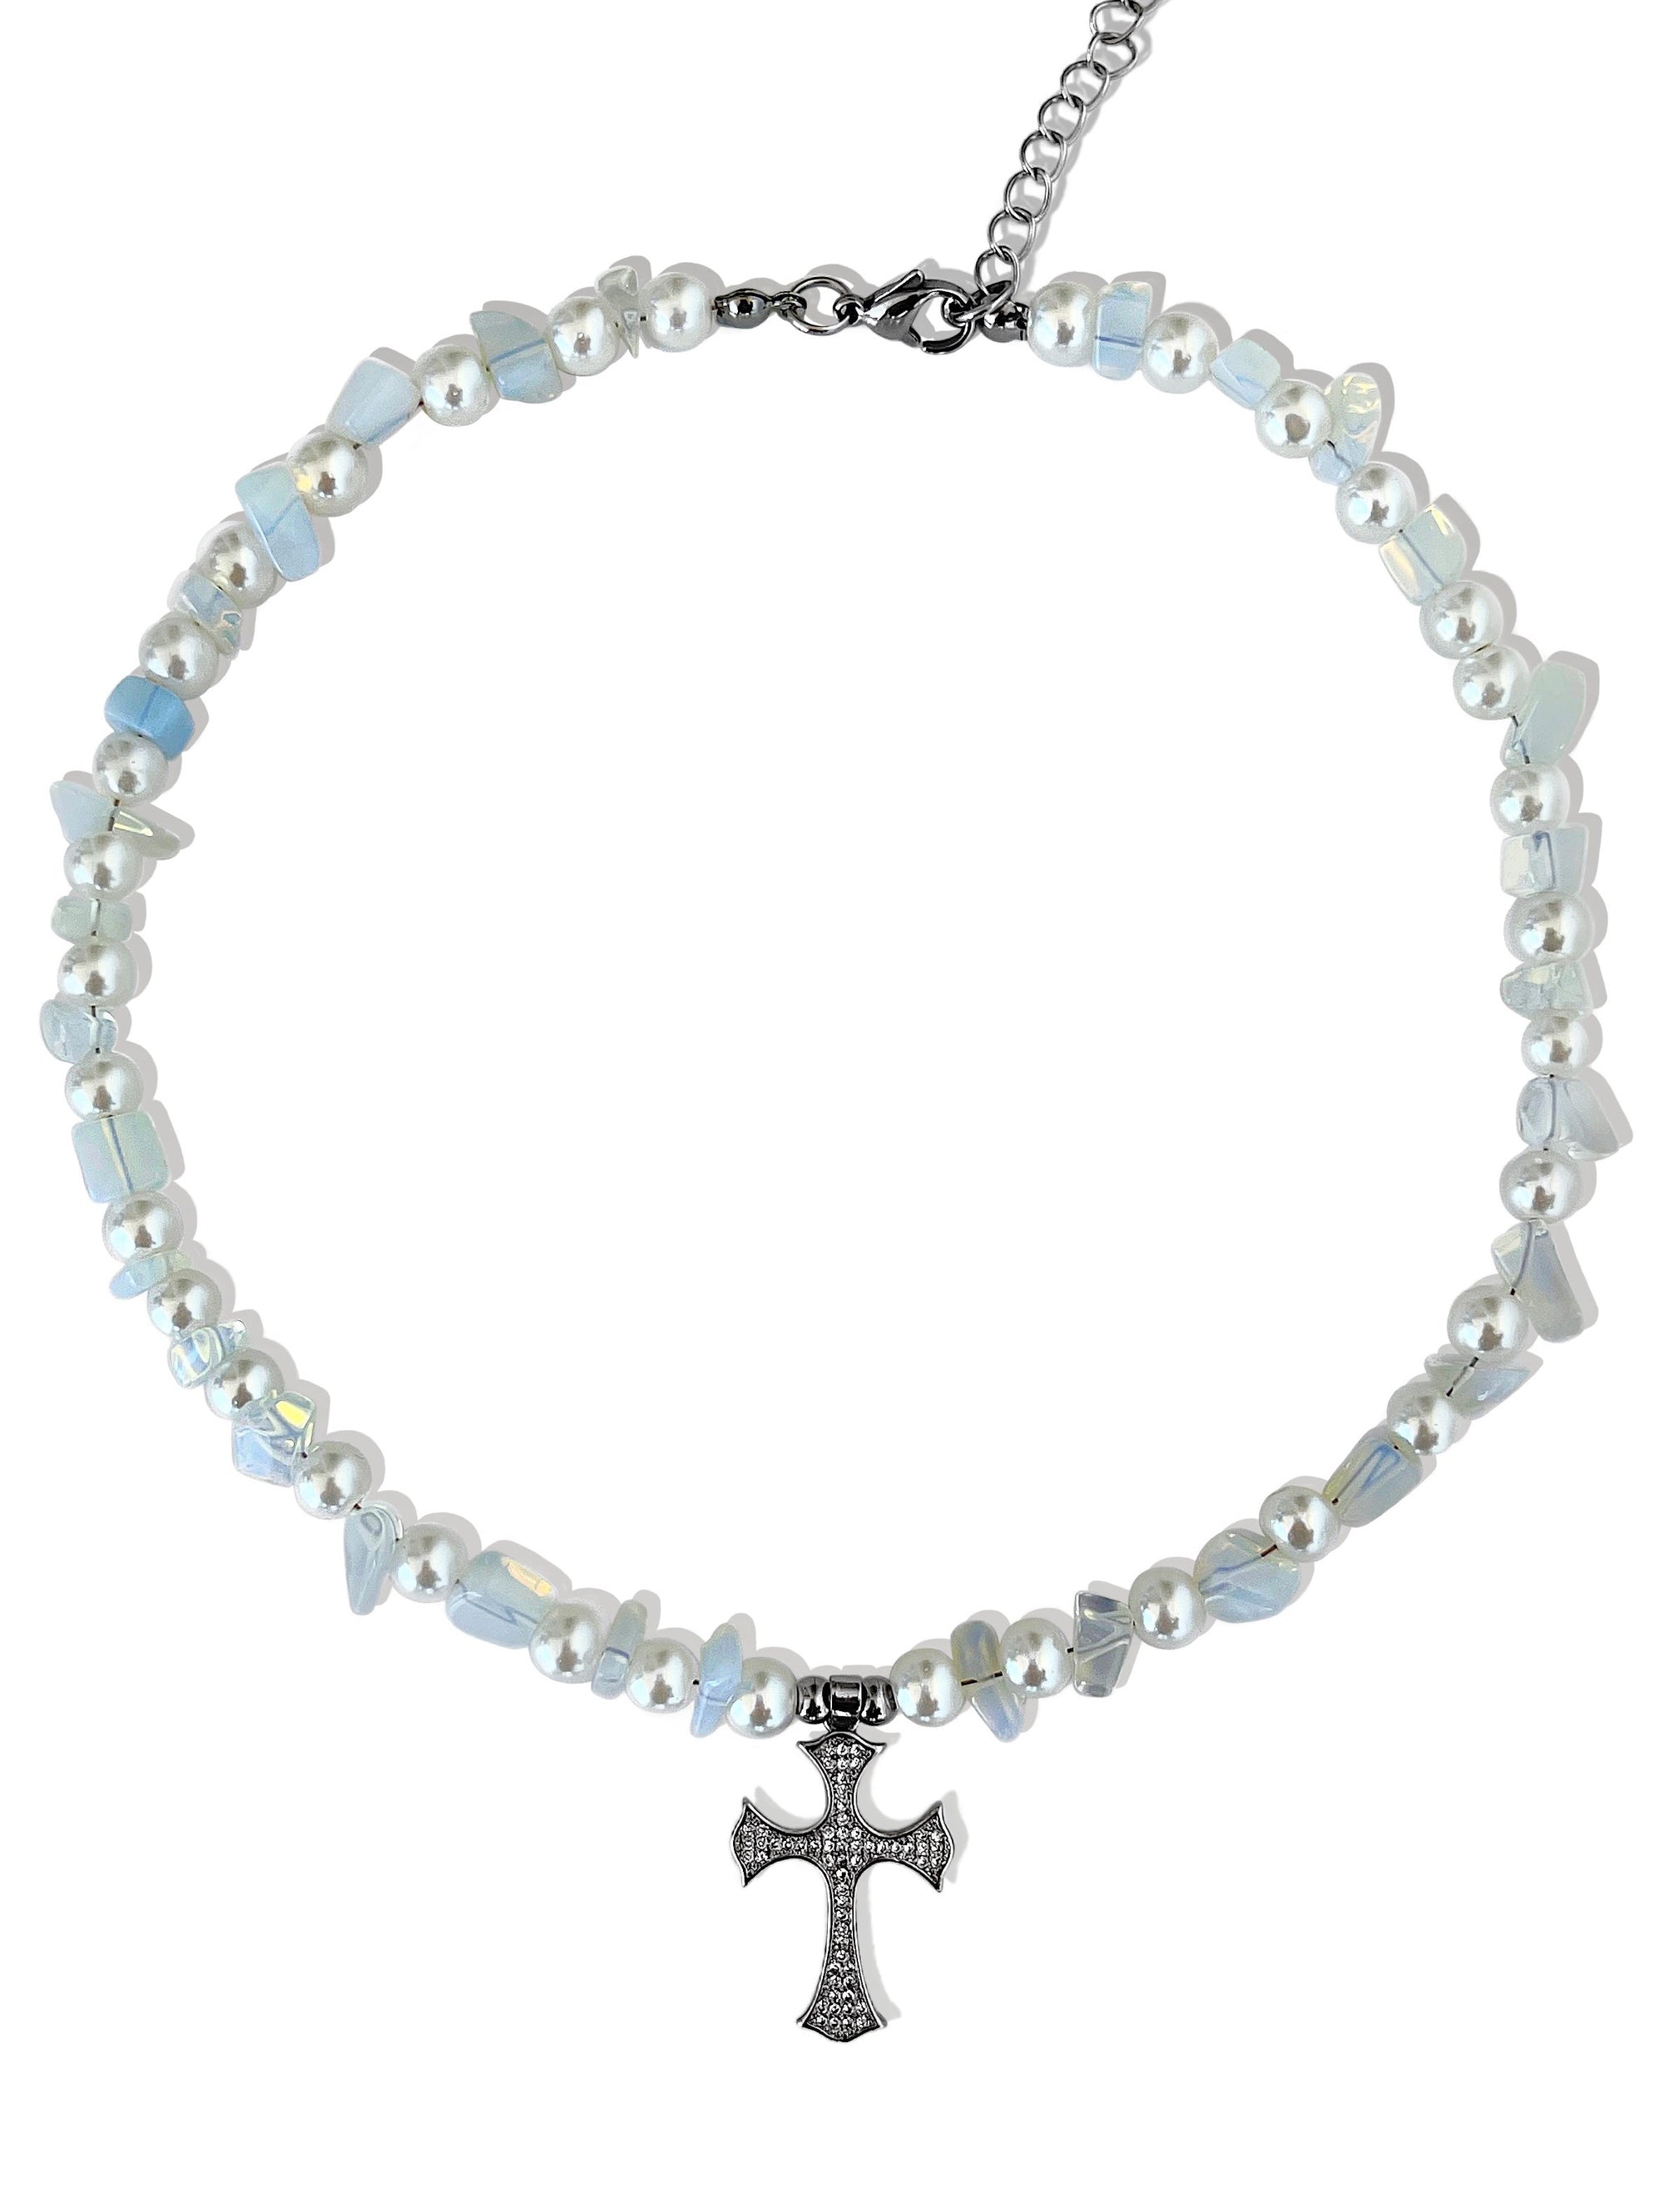 IN 549 WE TRUST OPALITE STONE NECKLACE